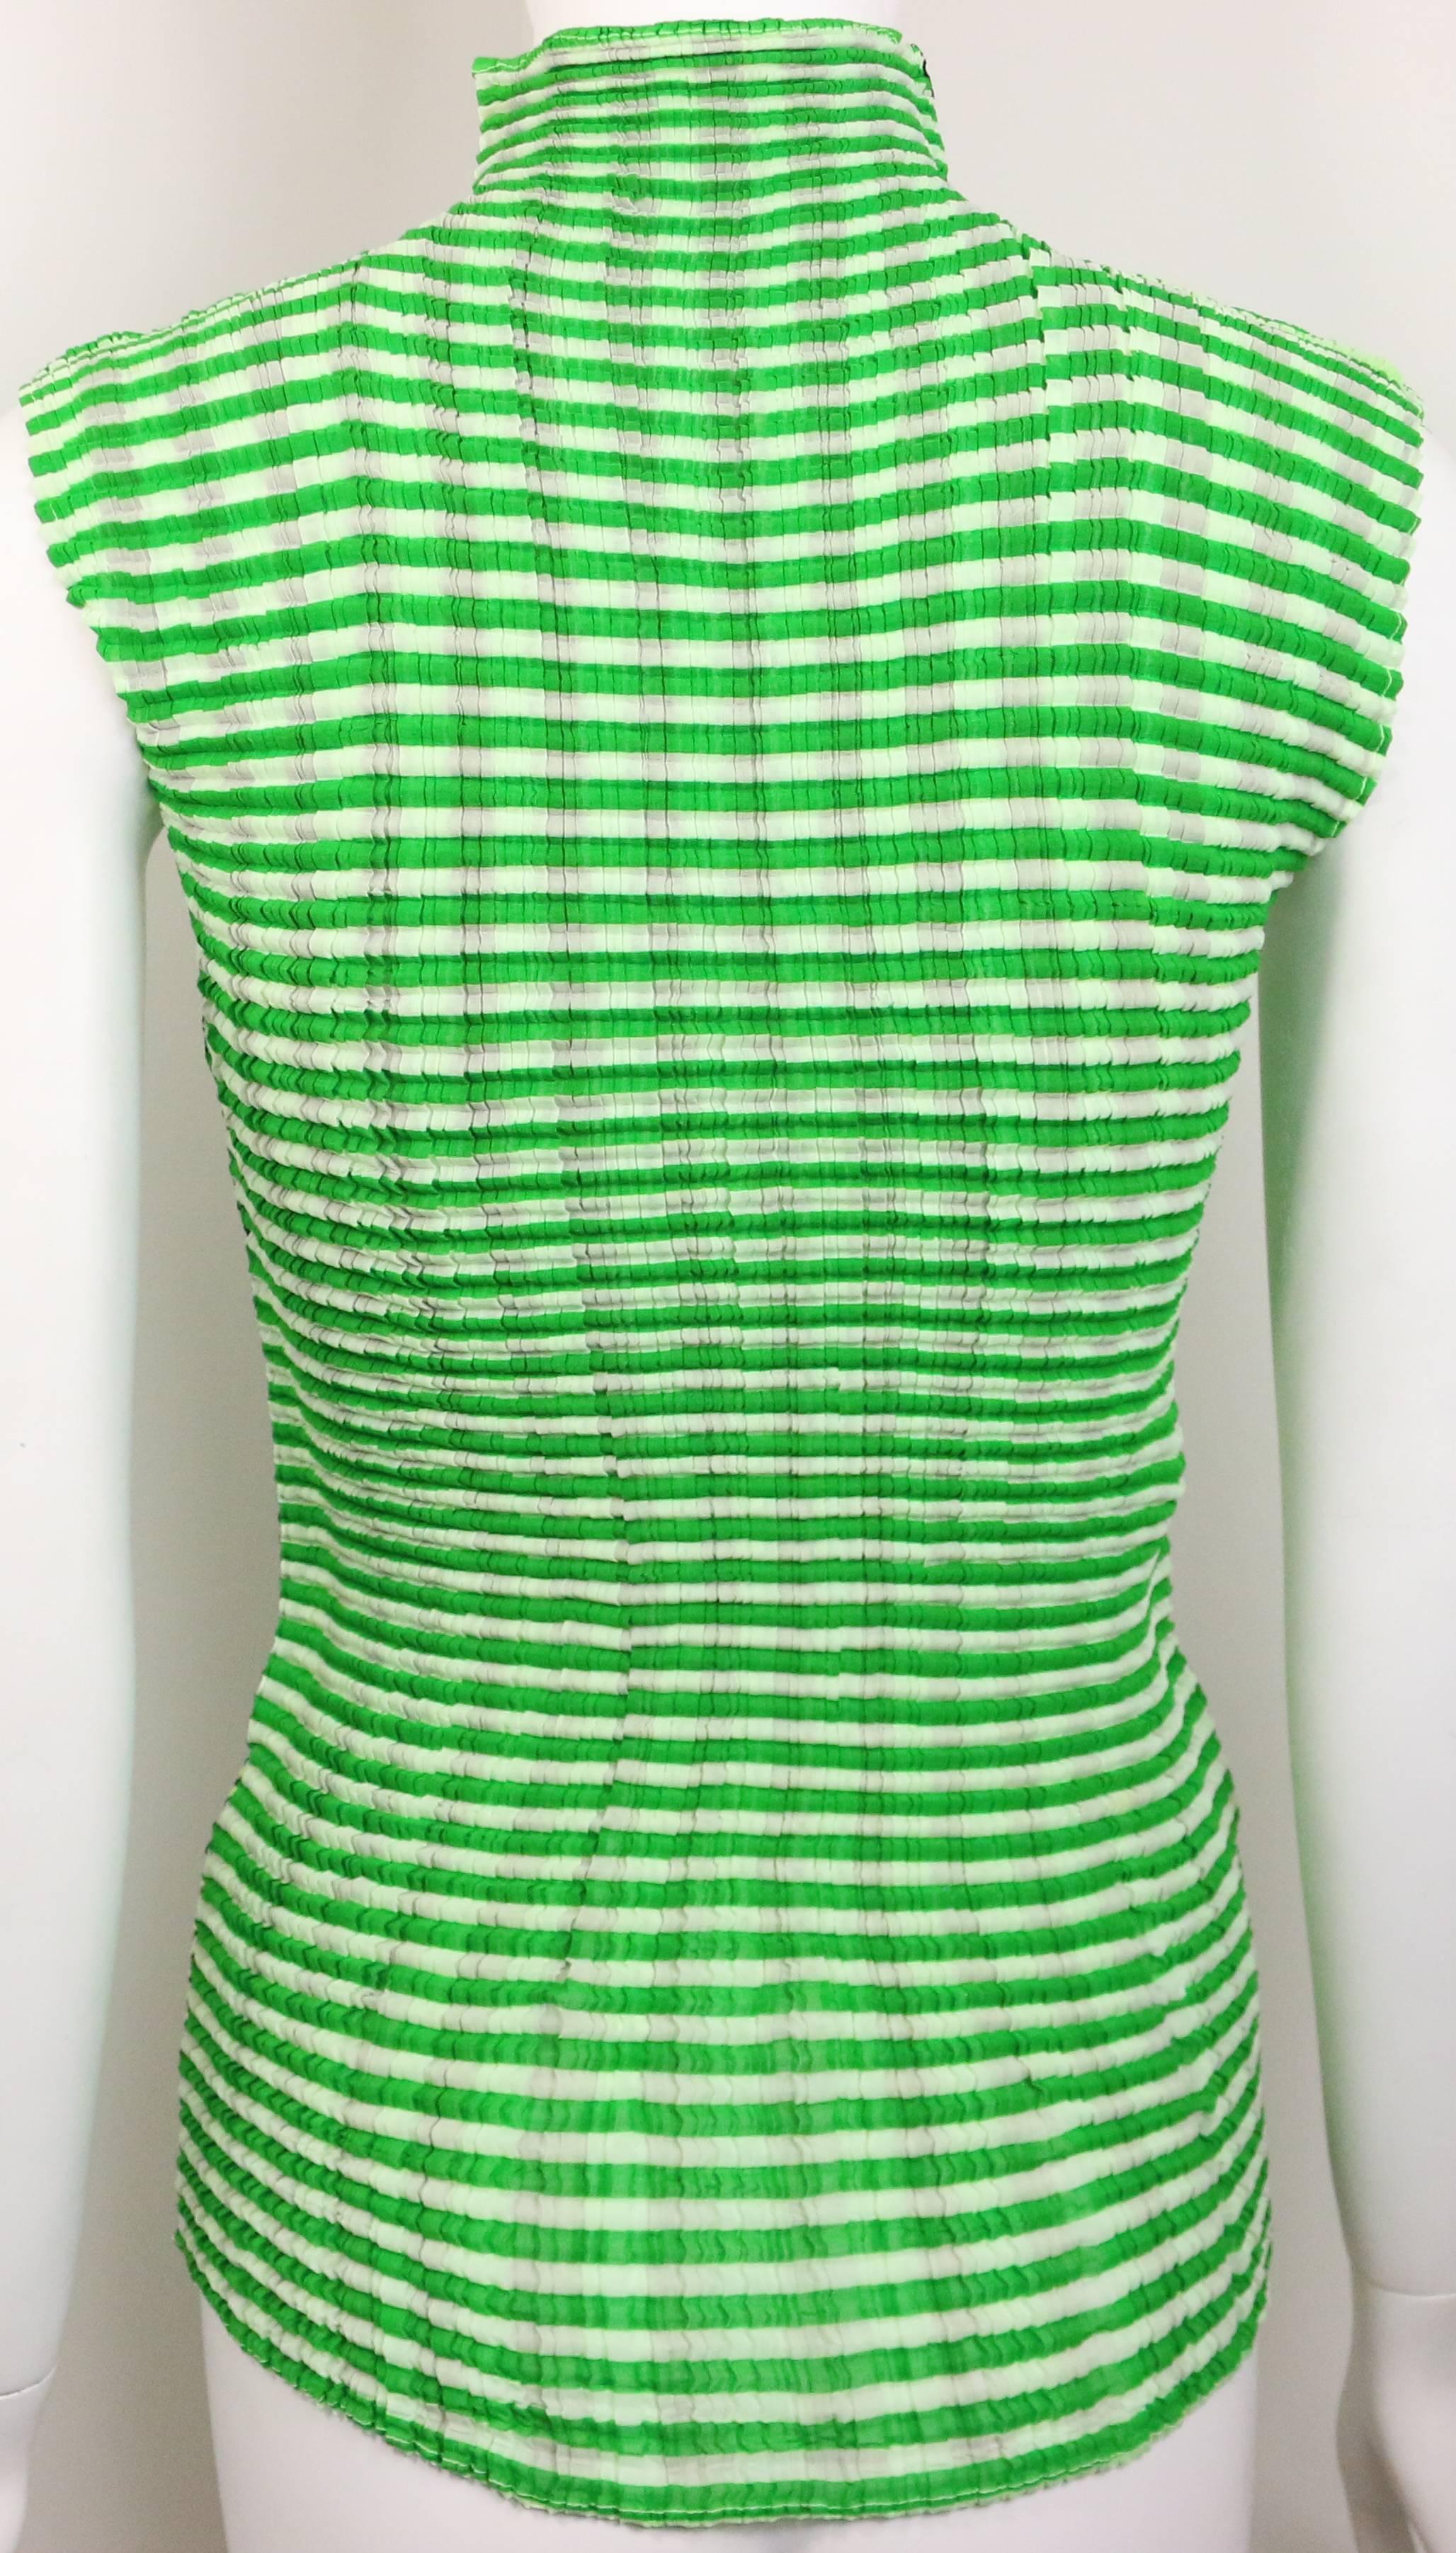 - Issey Miyake pleated two sides( one side is black vertical stripe, white and yellow horizontal stripe. The other side is white and green horizontal stripe) colour block sleeveless top. 

- Size M. 

- 100% Polyester. 

- Made in Japan. 

- Height: